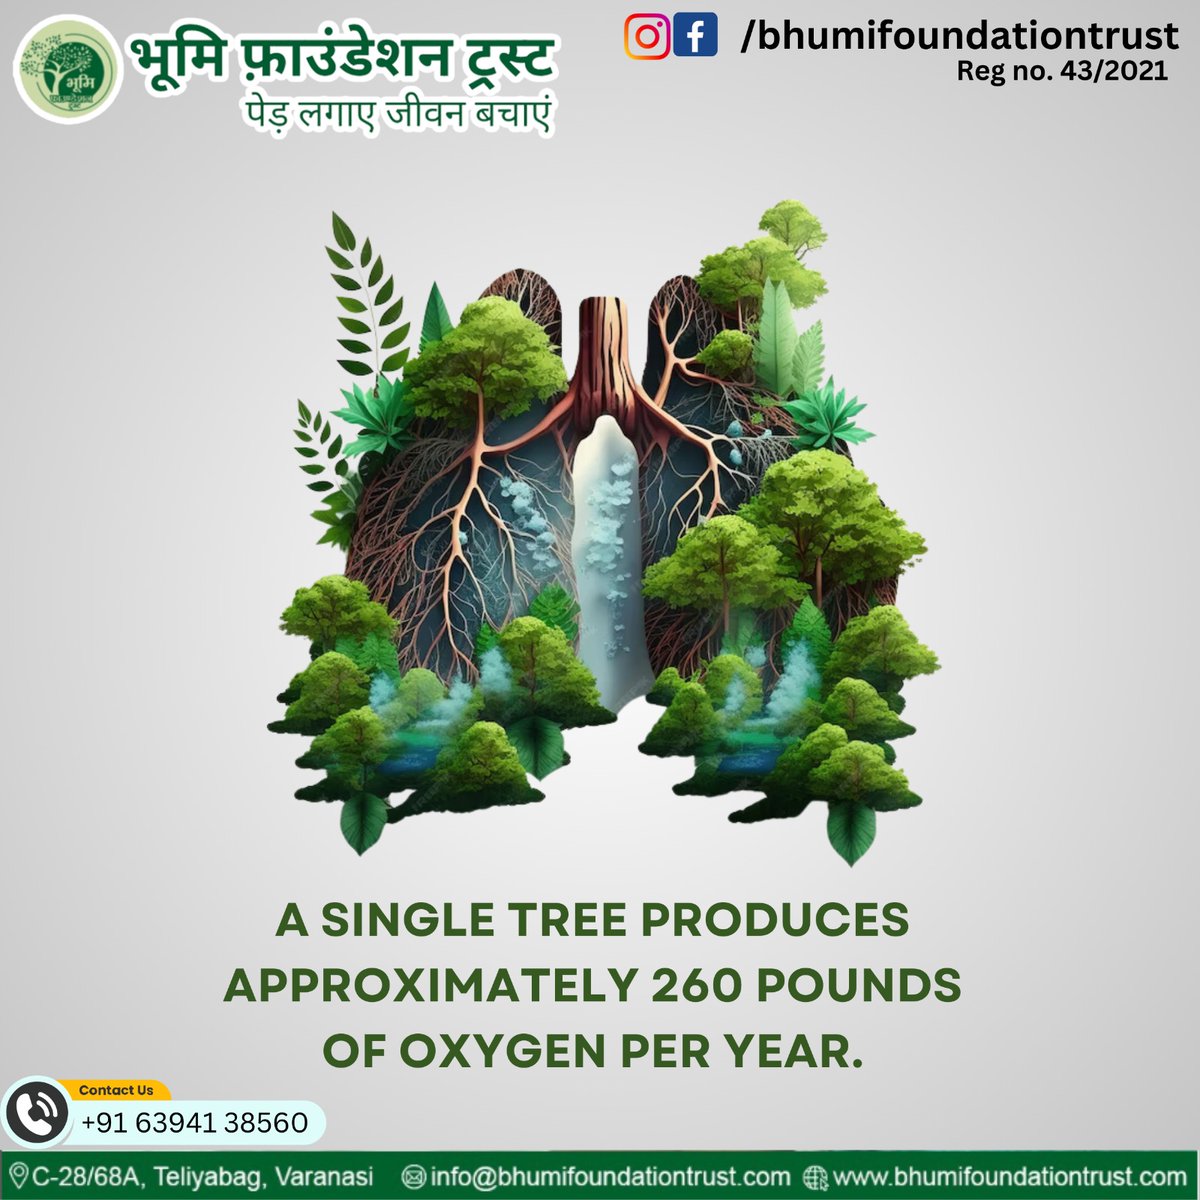 Breathe in the power of nature! Did you know that a single tree produces approximately 260 pounds of oxygen per year? 🌳🌬️ Let's protect our lungs of the Earth. Join Bhumi Foundation Trust in planting trees for a healthier future. 🌱💚
 #BhumiFoundation #GreenEarth #OxygenHeroes